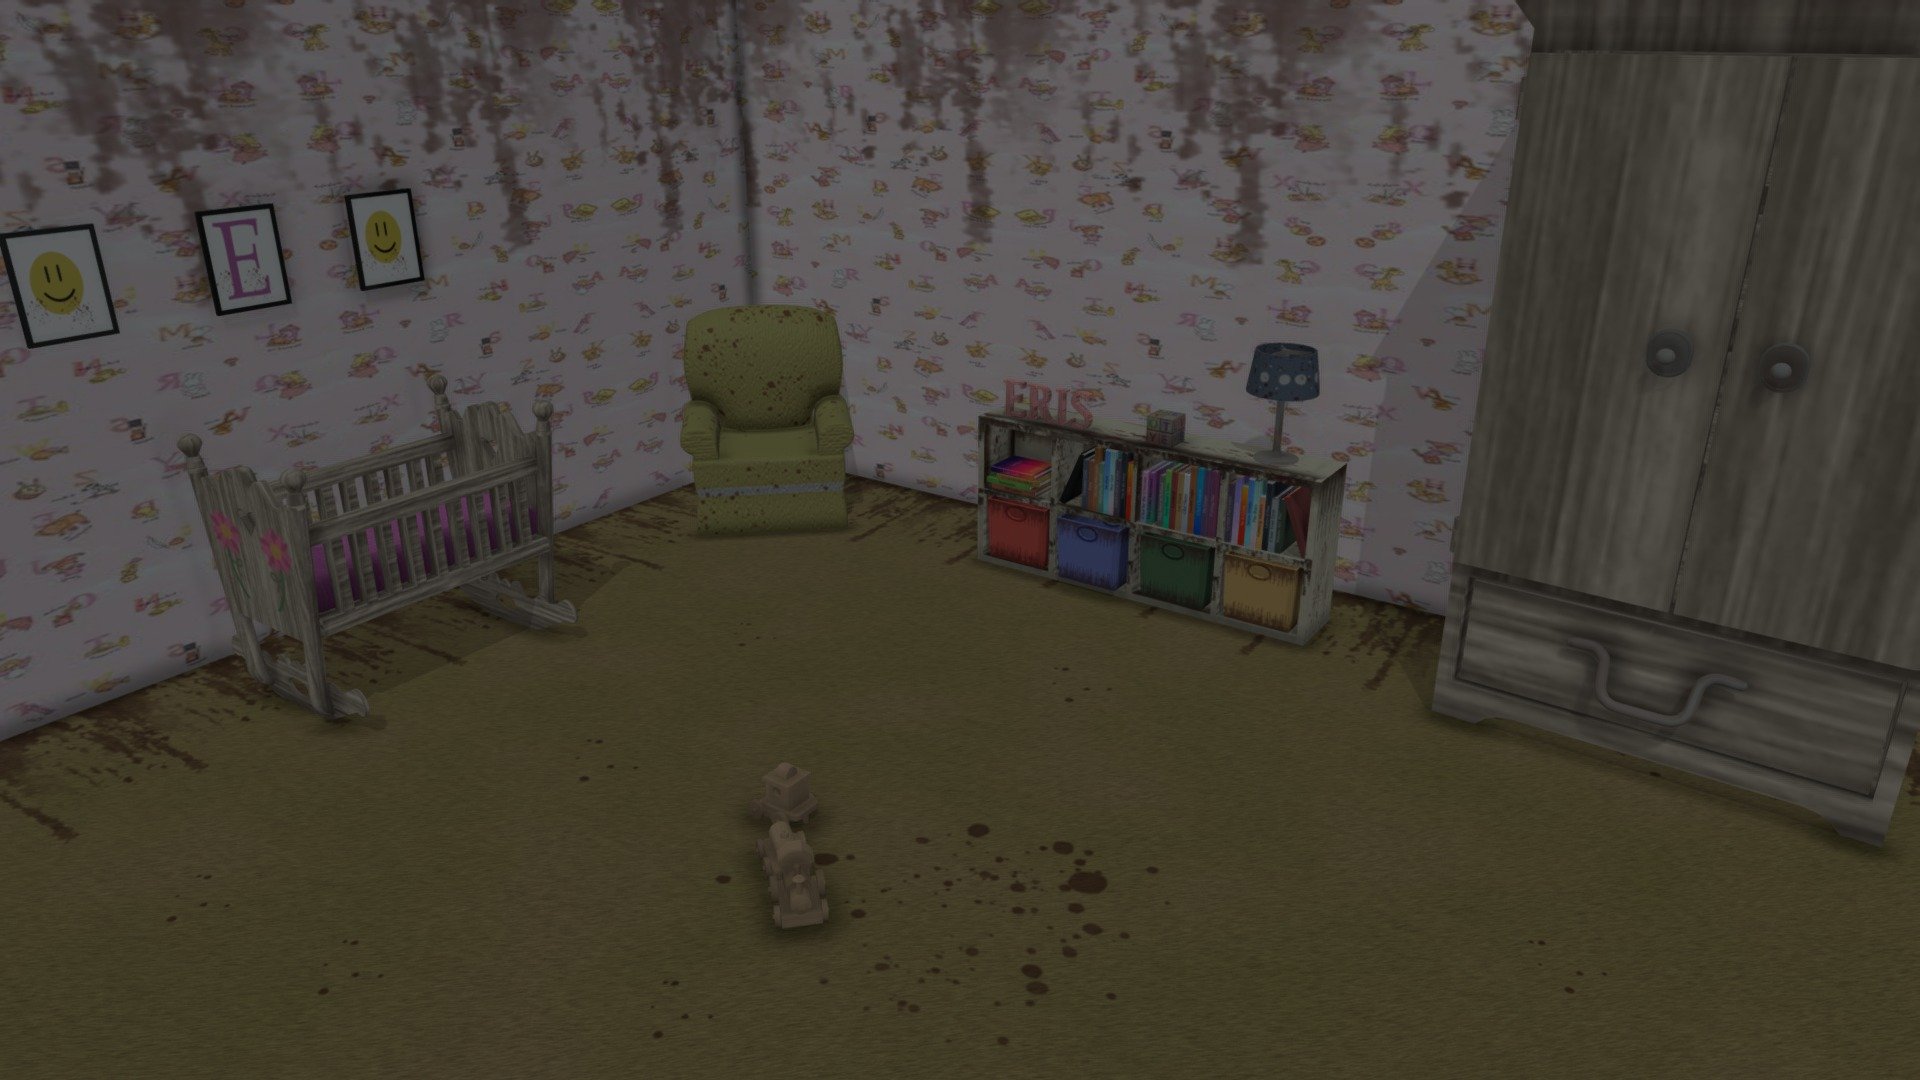 Idea for a baby's room layout in a horror game 3d model